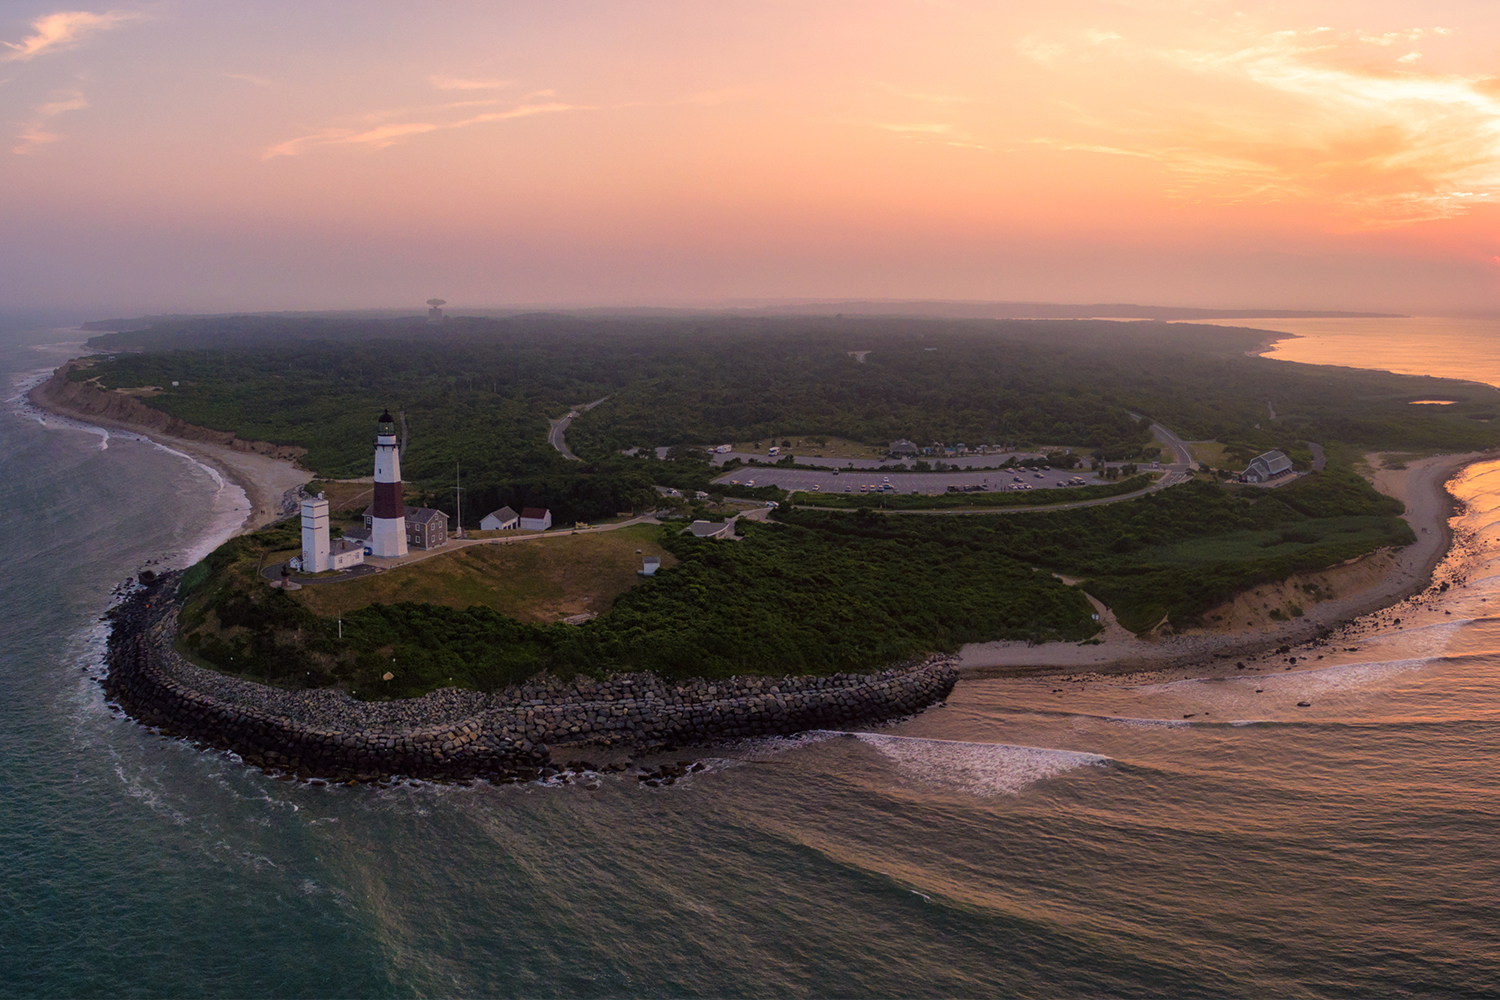 Aerial view of Montauk Point in East Hampton, Long Island, New York